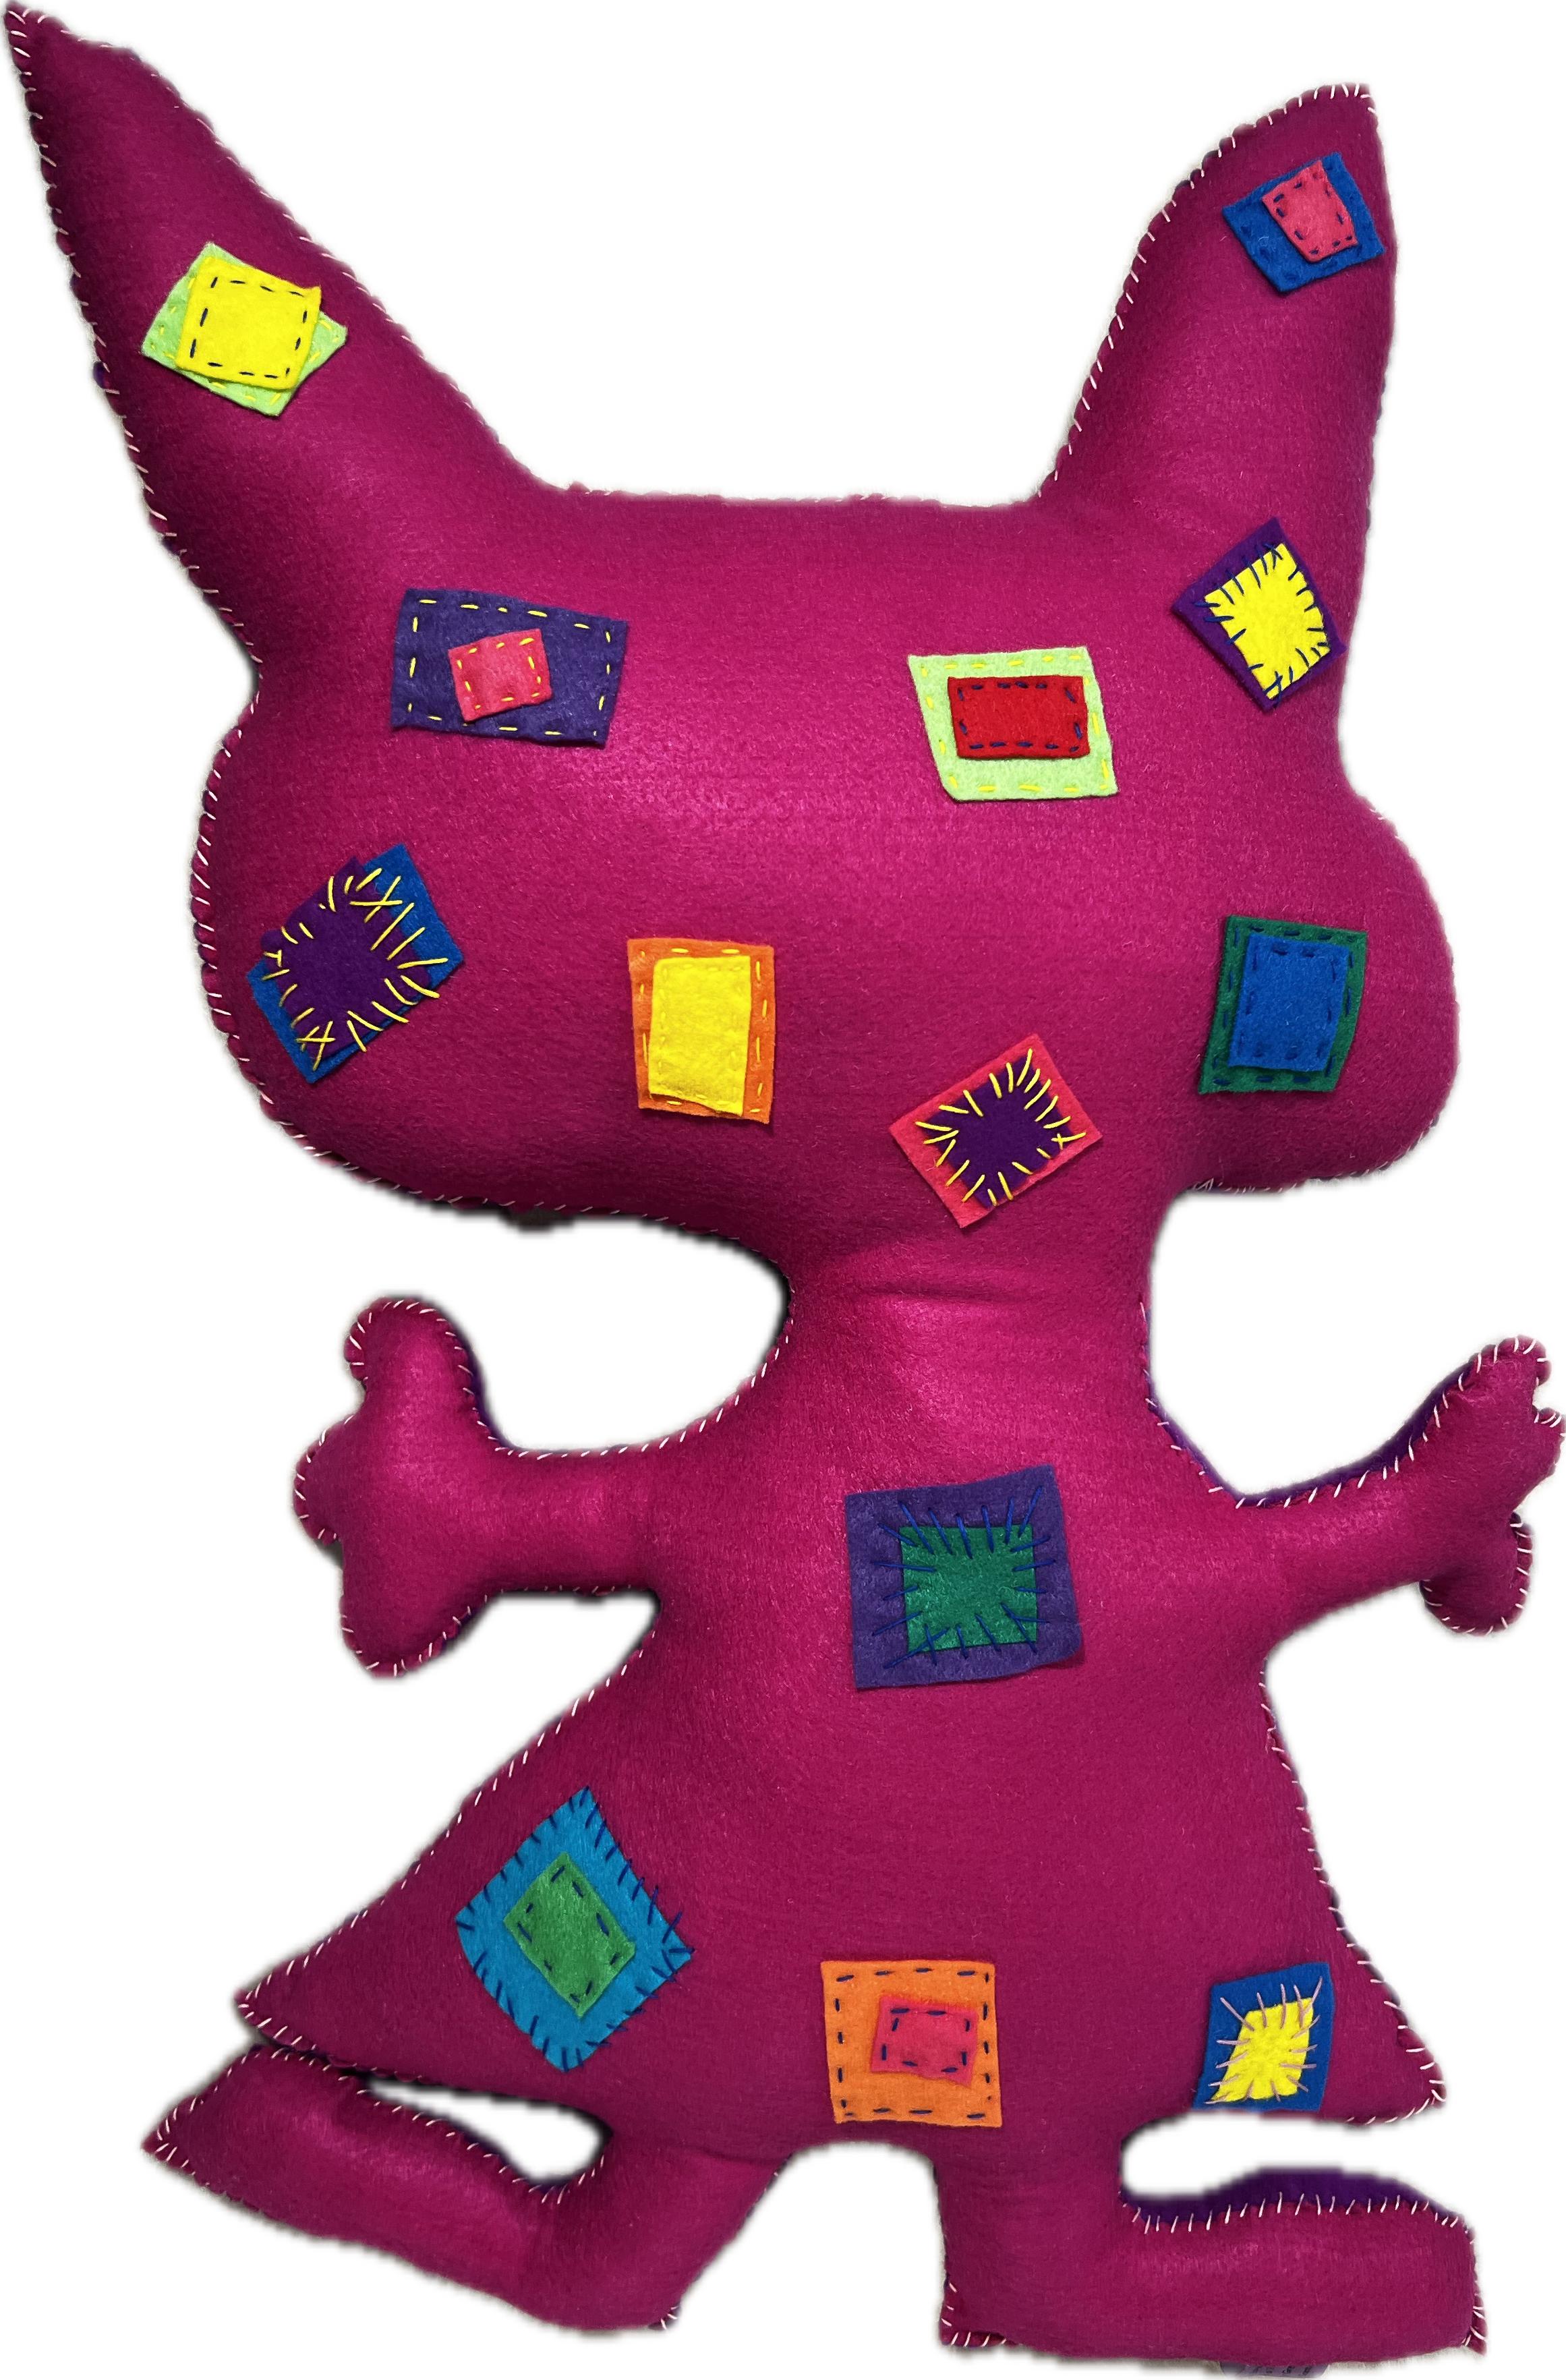 Purple and Pink Free Range Critter, soft sculpture, by Kerry Green, Oppenheimer 1